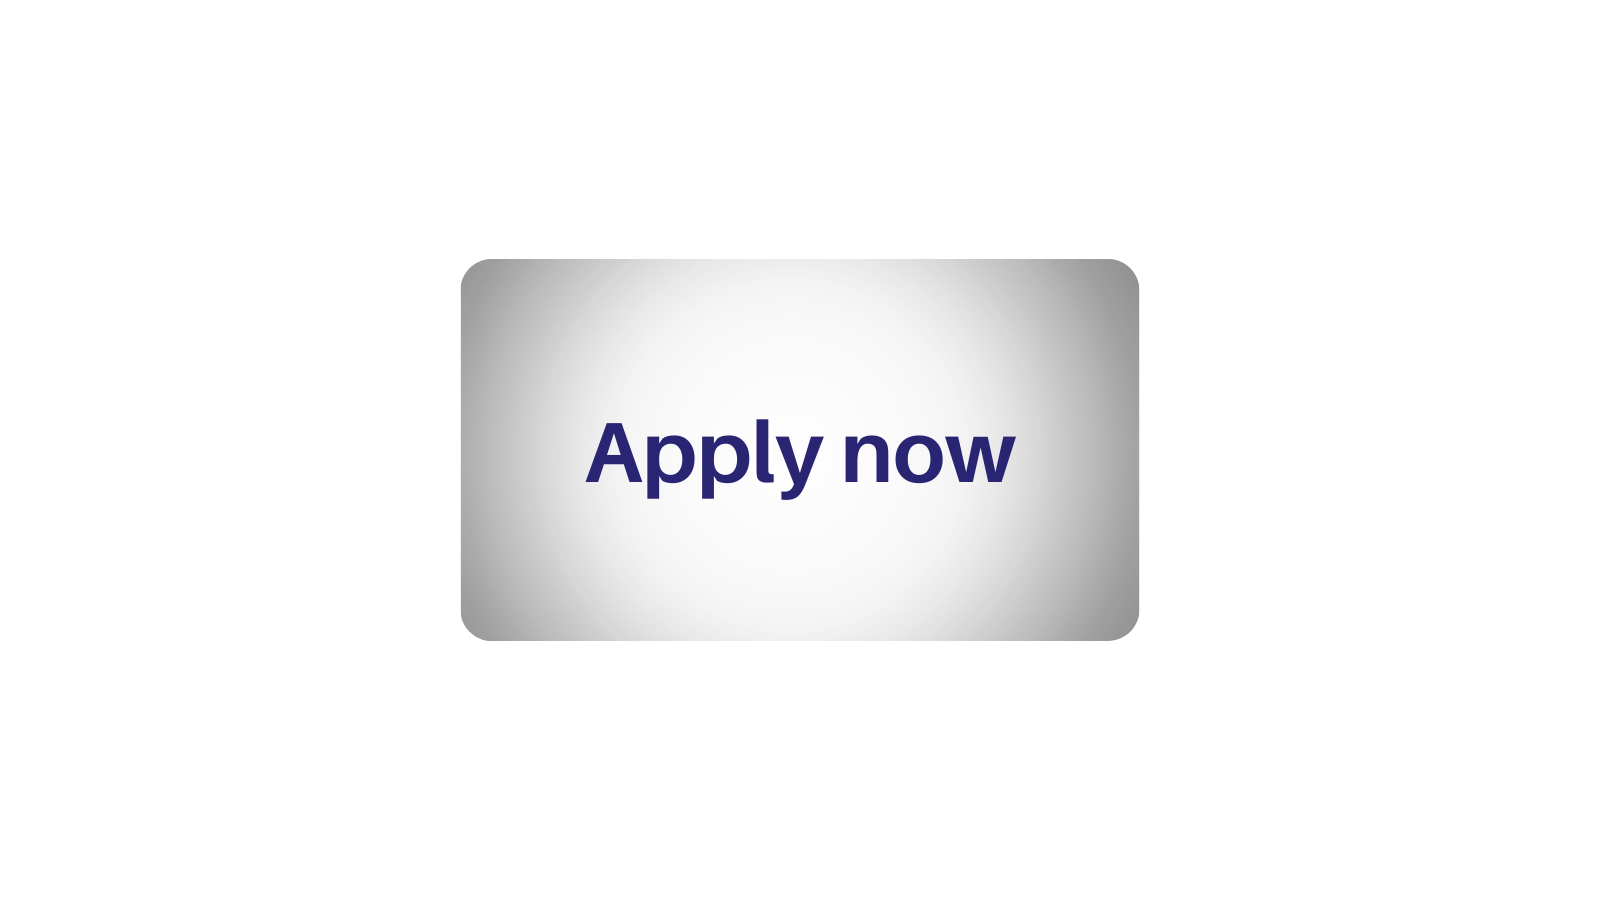 Apply now button